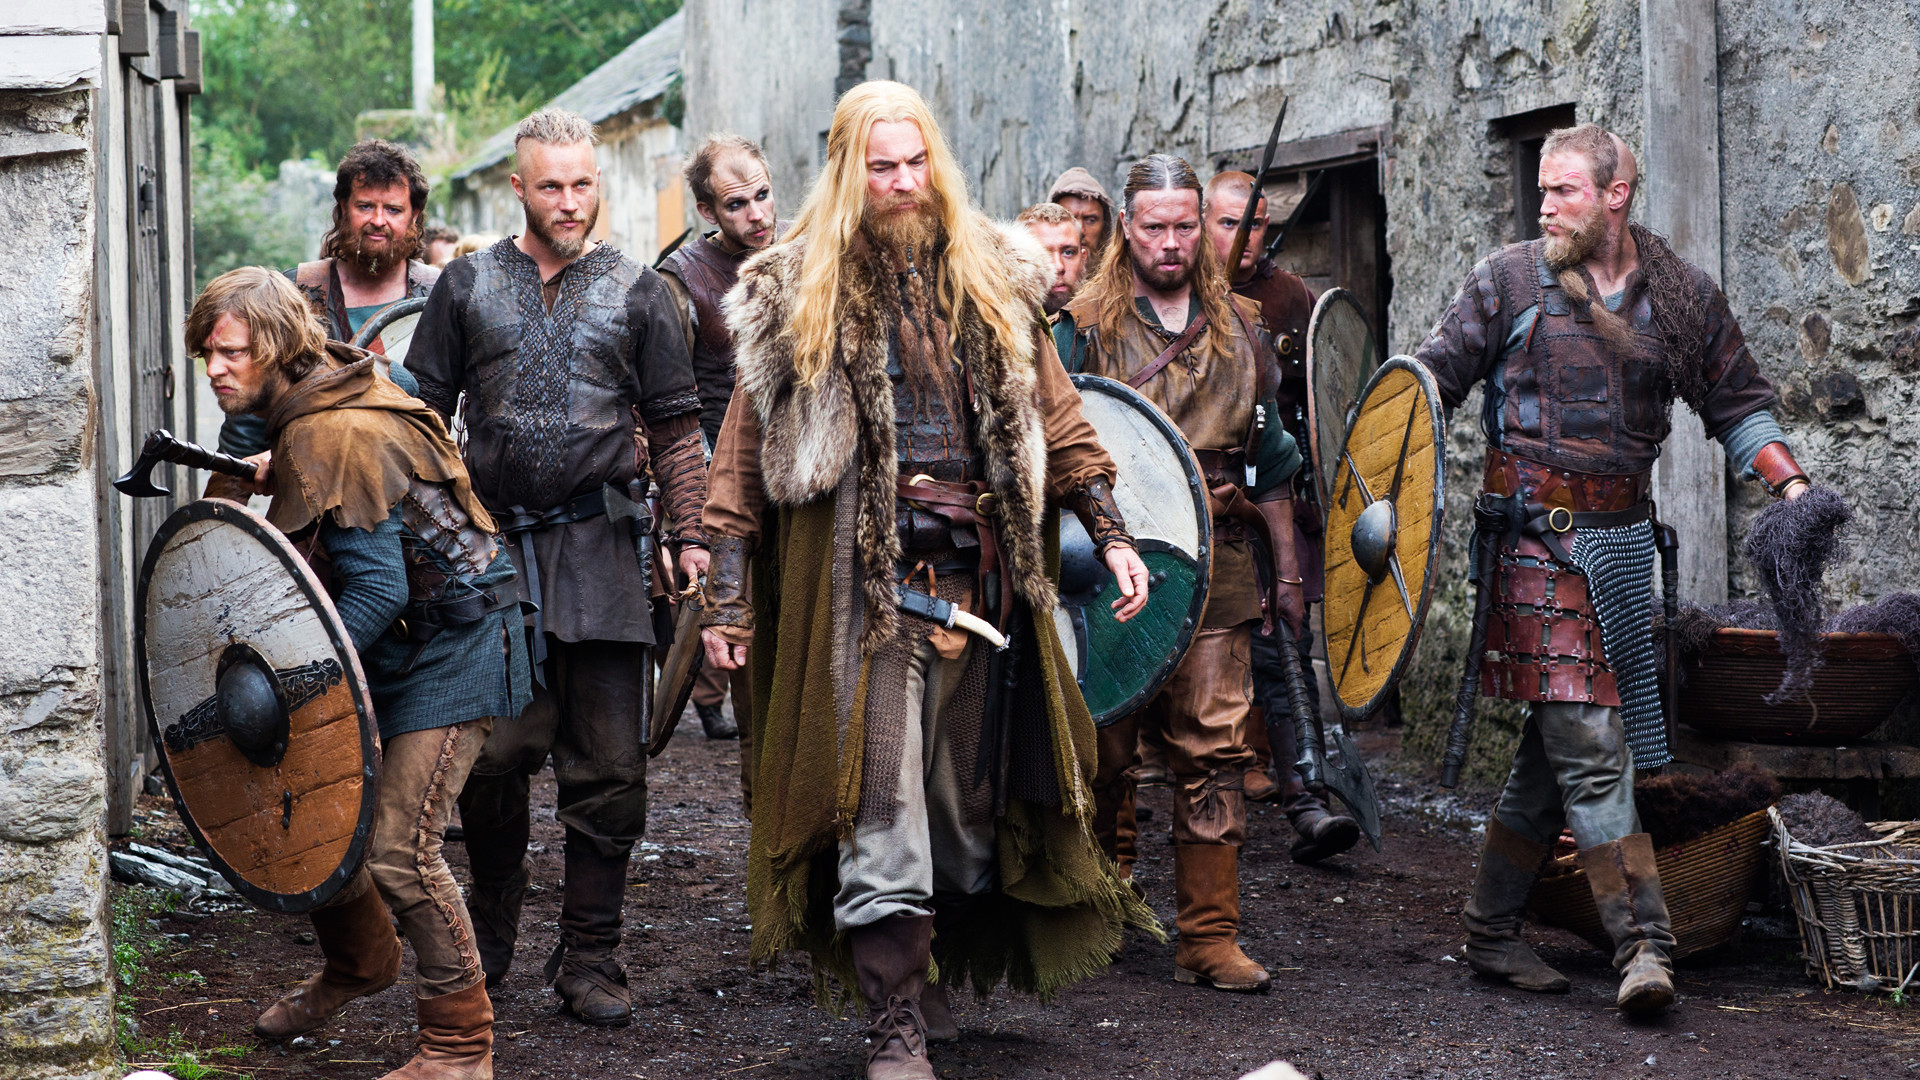 The Vikings Costume Designer Joan Bergin Dispels Norse Myths. Turns out Vikings Were The First Metrosexuals